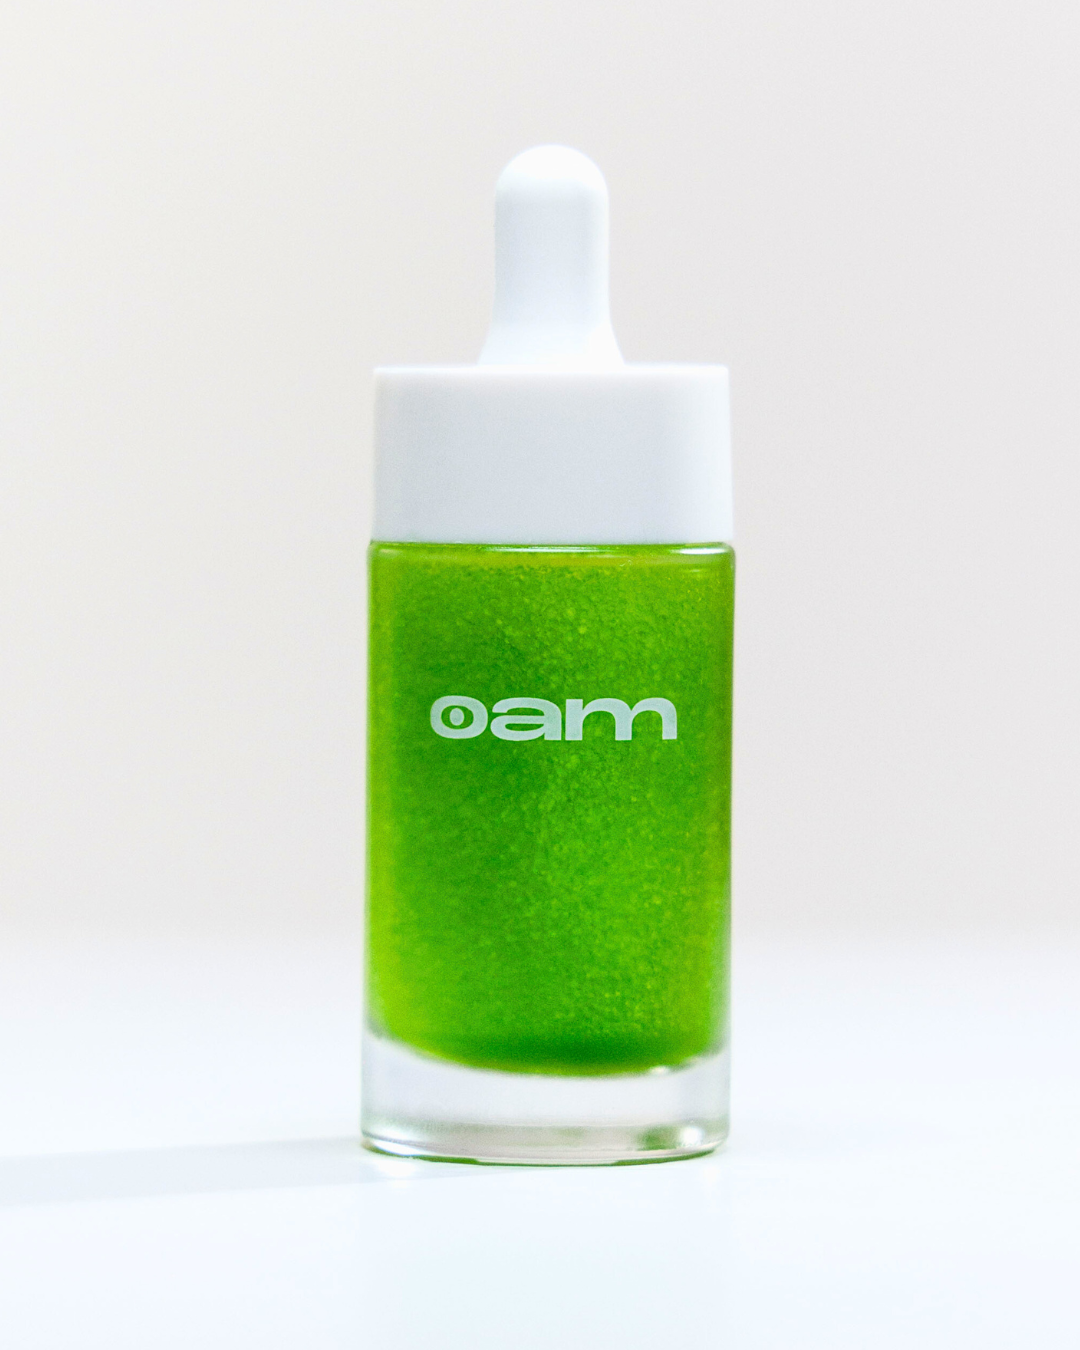 Close up of eyeam dropper. It has a white top and is green inside.